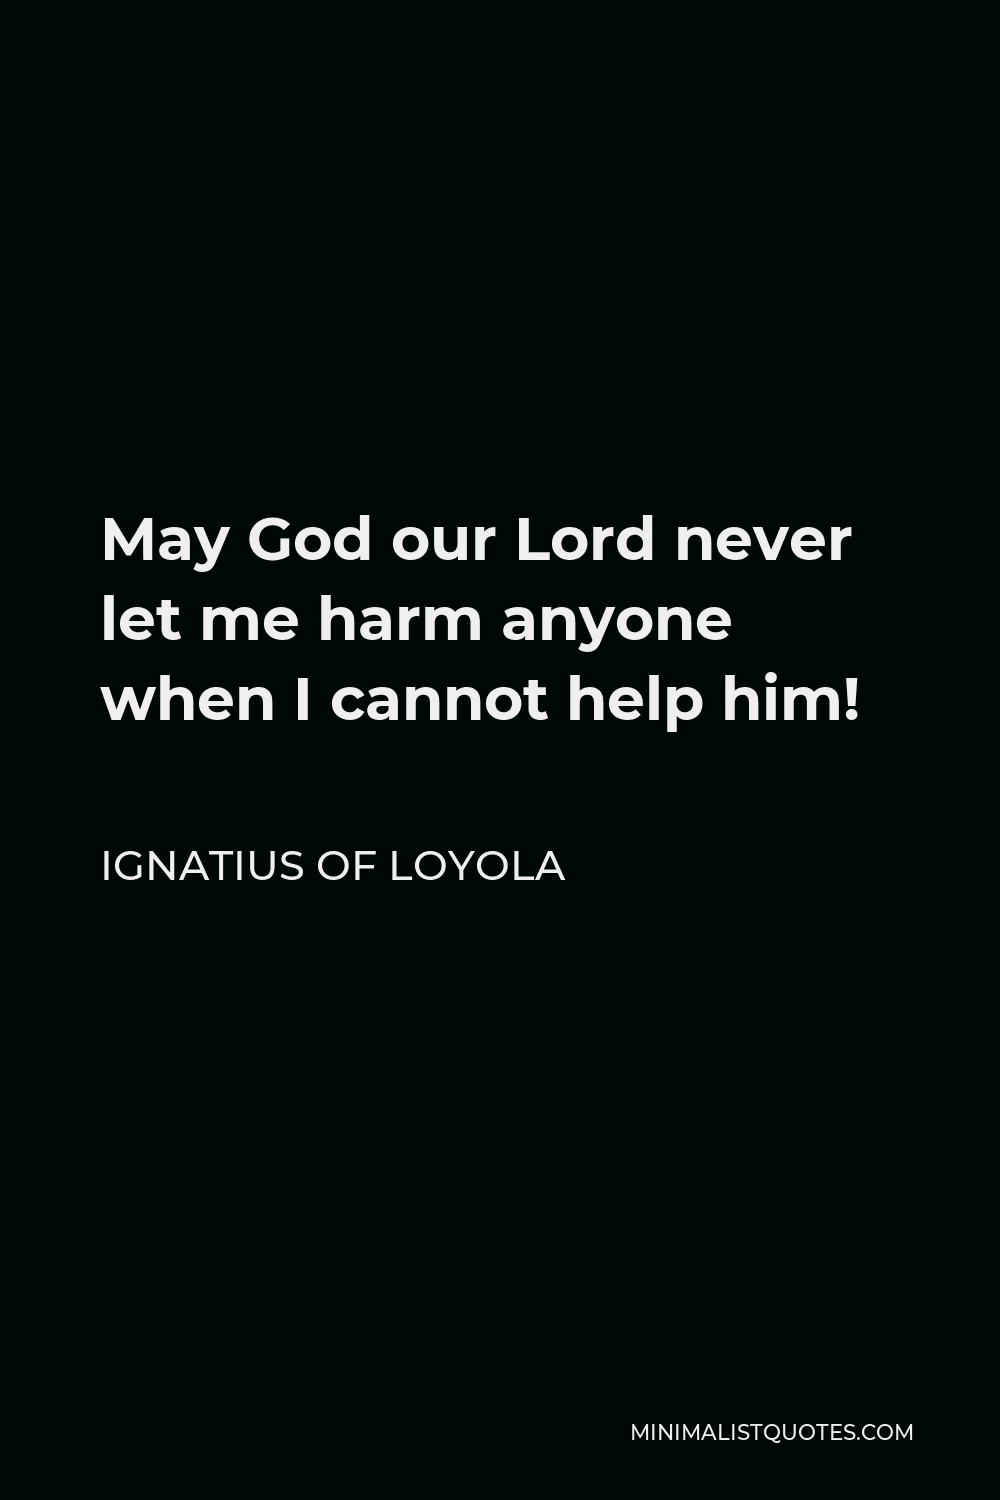 Ignatius of Loyola Quote - May God our Lord never let me harm anyone when I cannot help him!